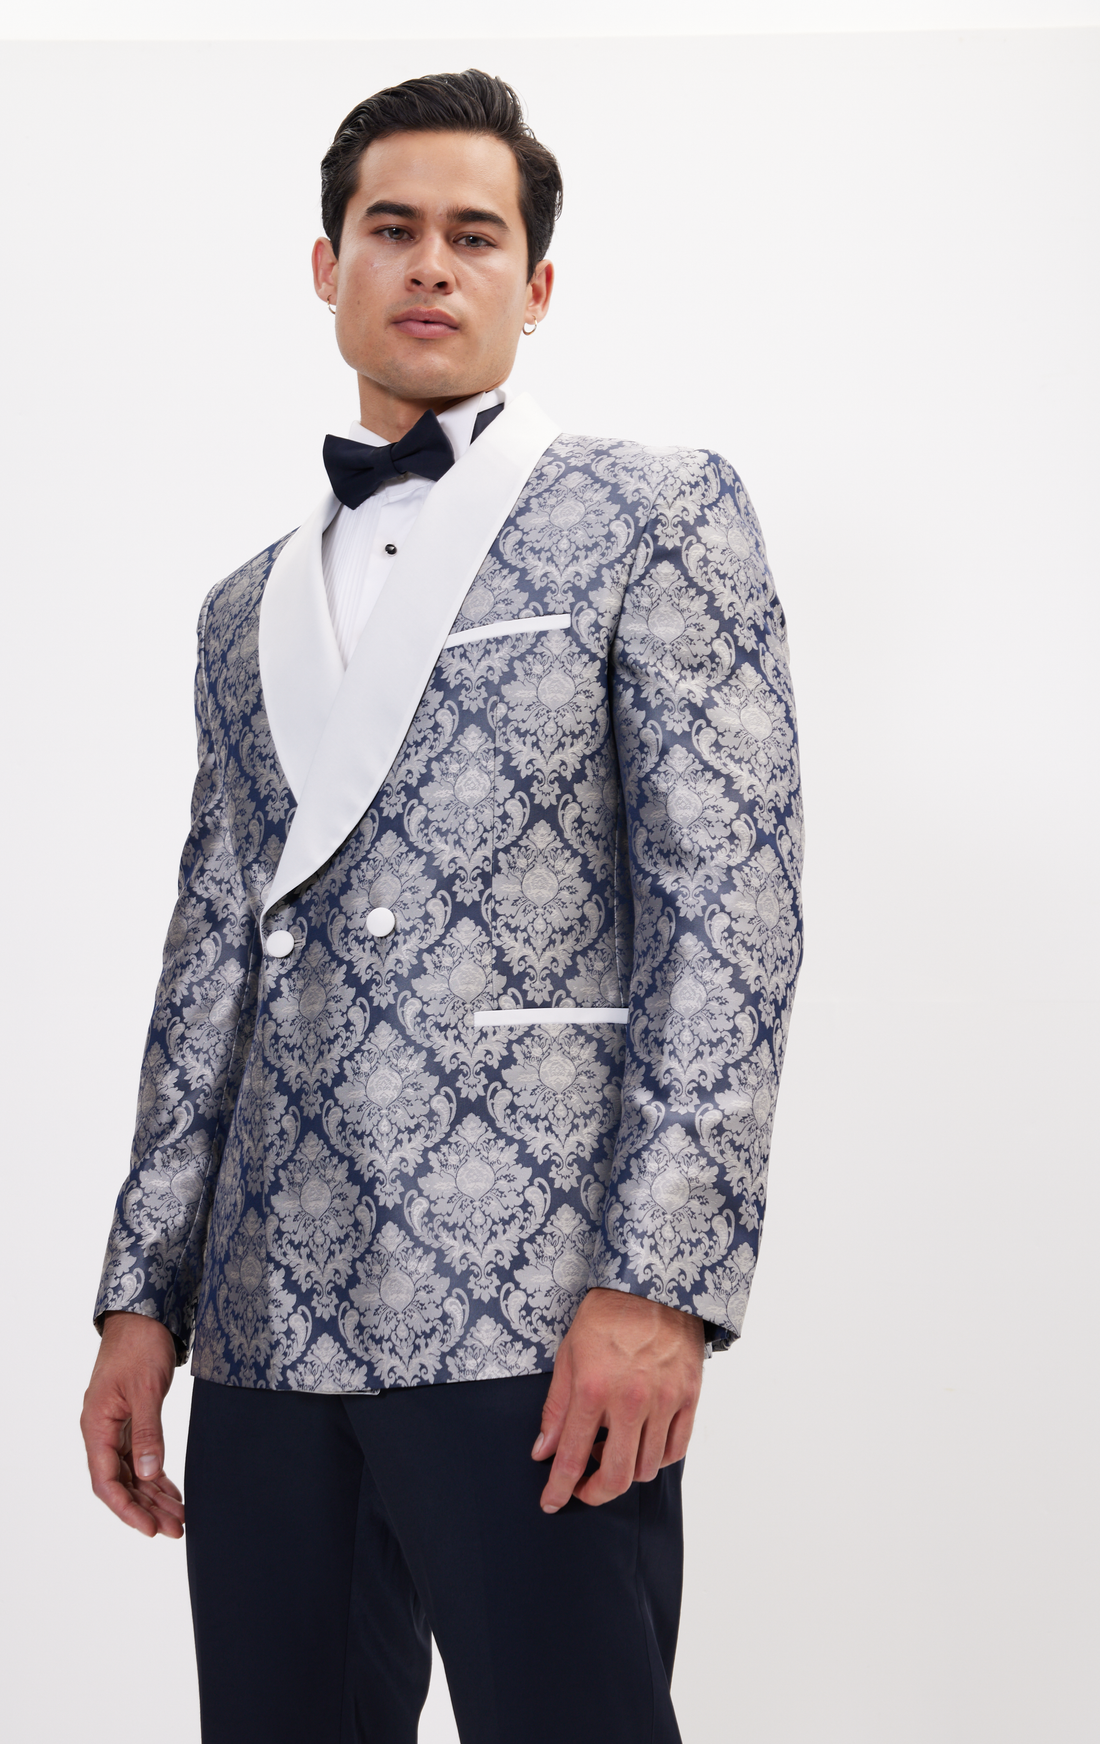 N° 19062 DOUBLE BREASTED TEXTURED TUXEDO - NAVY WHITE